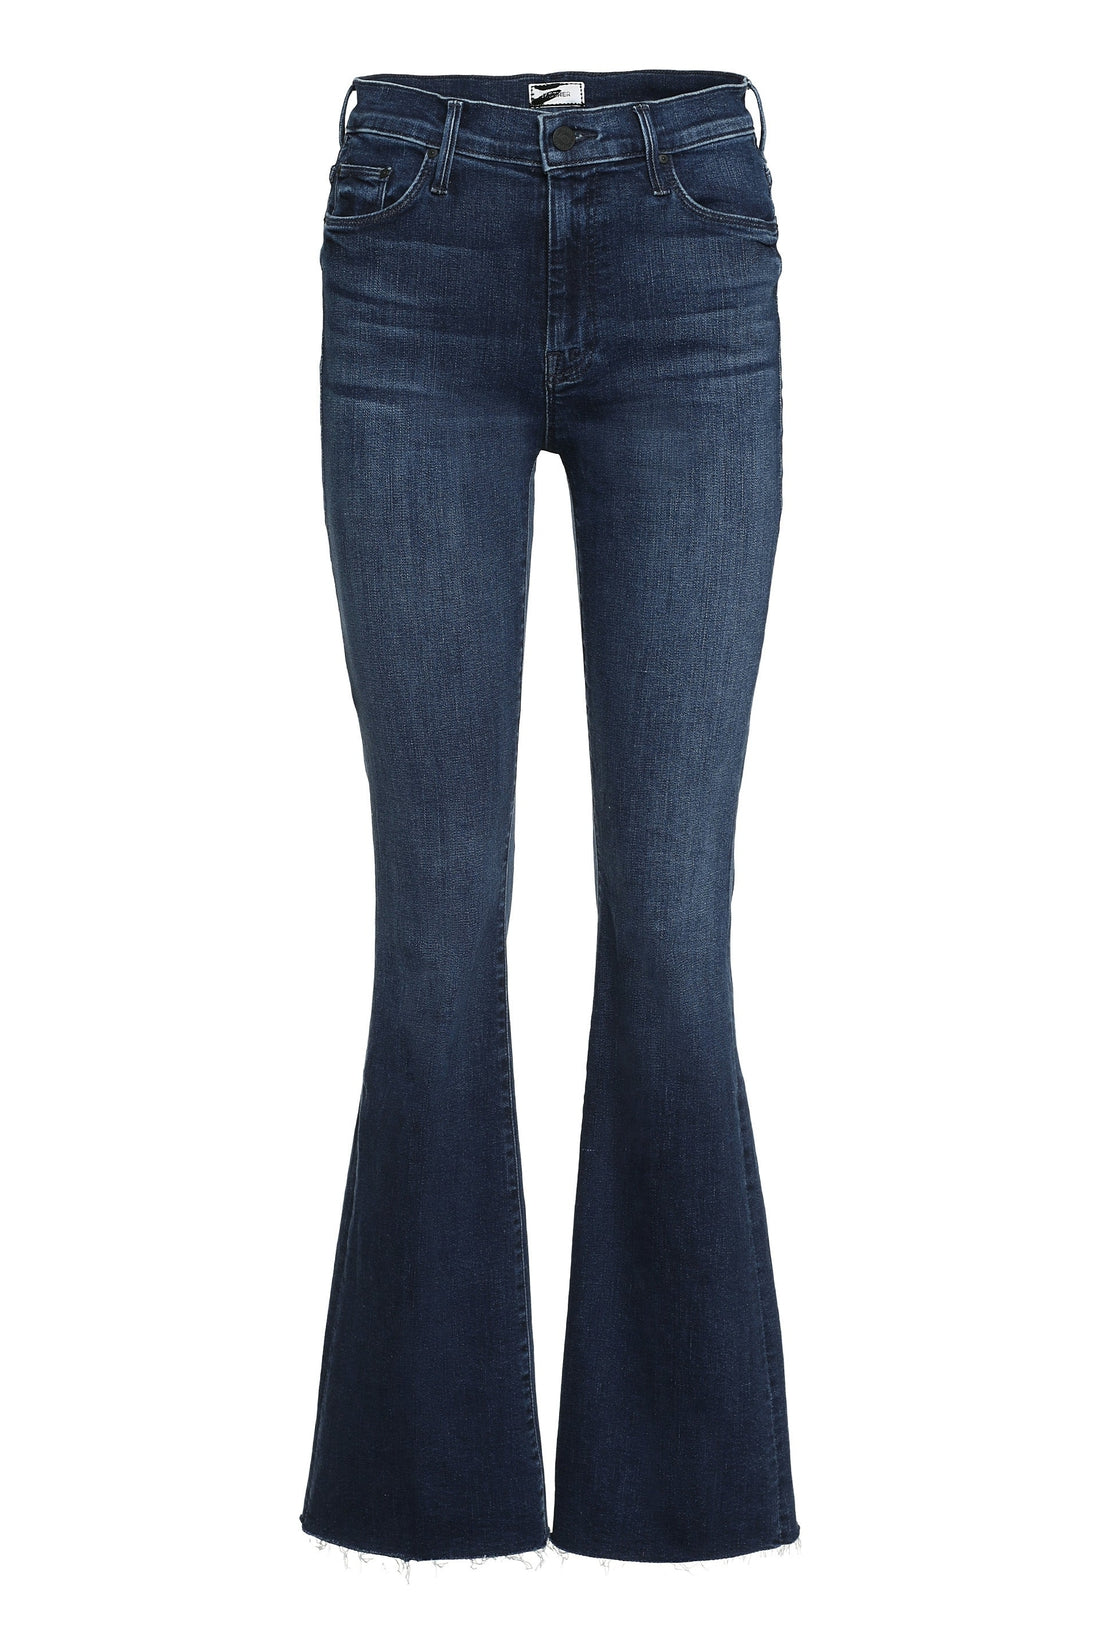 Mother-OUTLET-SALE-The Weekender Fray jeans-ARCHIVIST